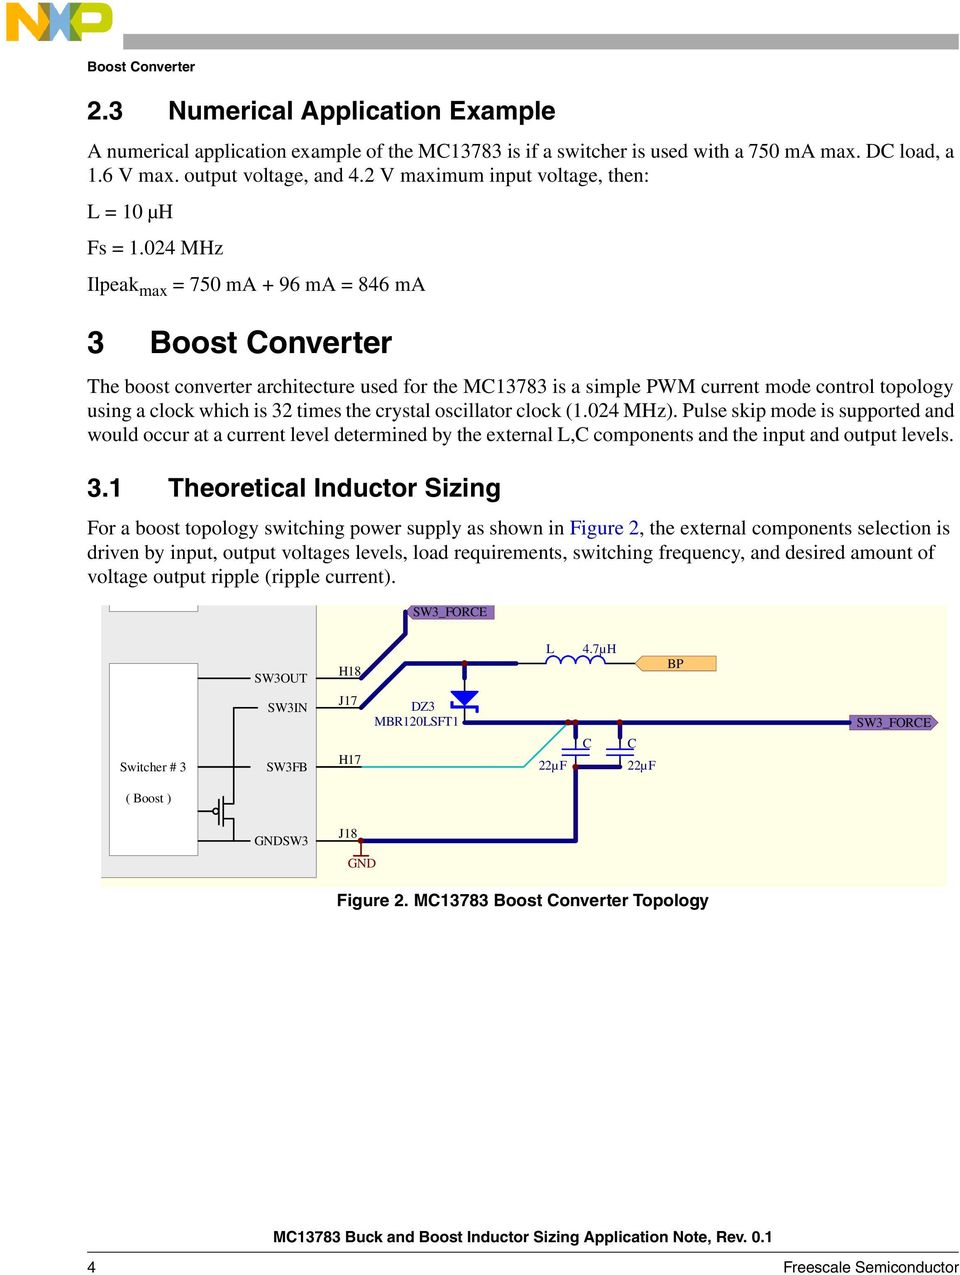 024 MHz Ilpeak max = 750 ma + 96 ma = 846 ma 3 Boost Converter The boost converter architecture used for the MC13783 is a simple PWM current mode control topology using a clock which is 32 times the